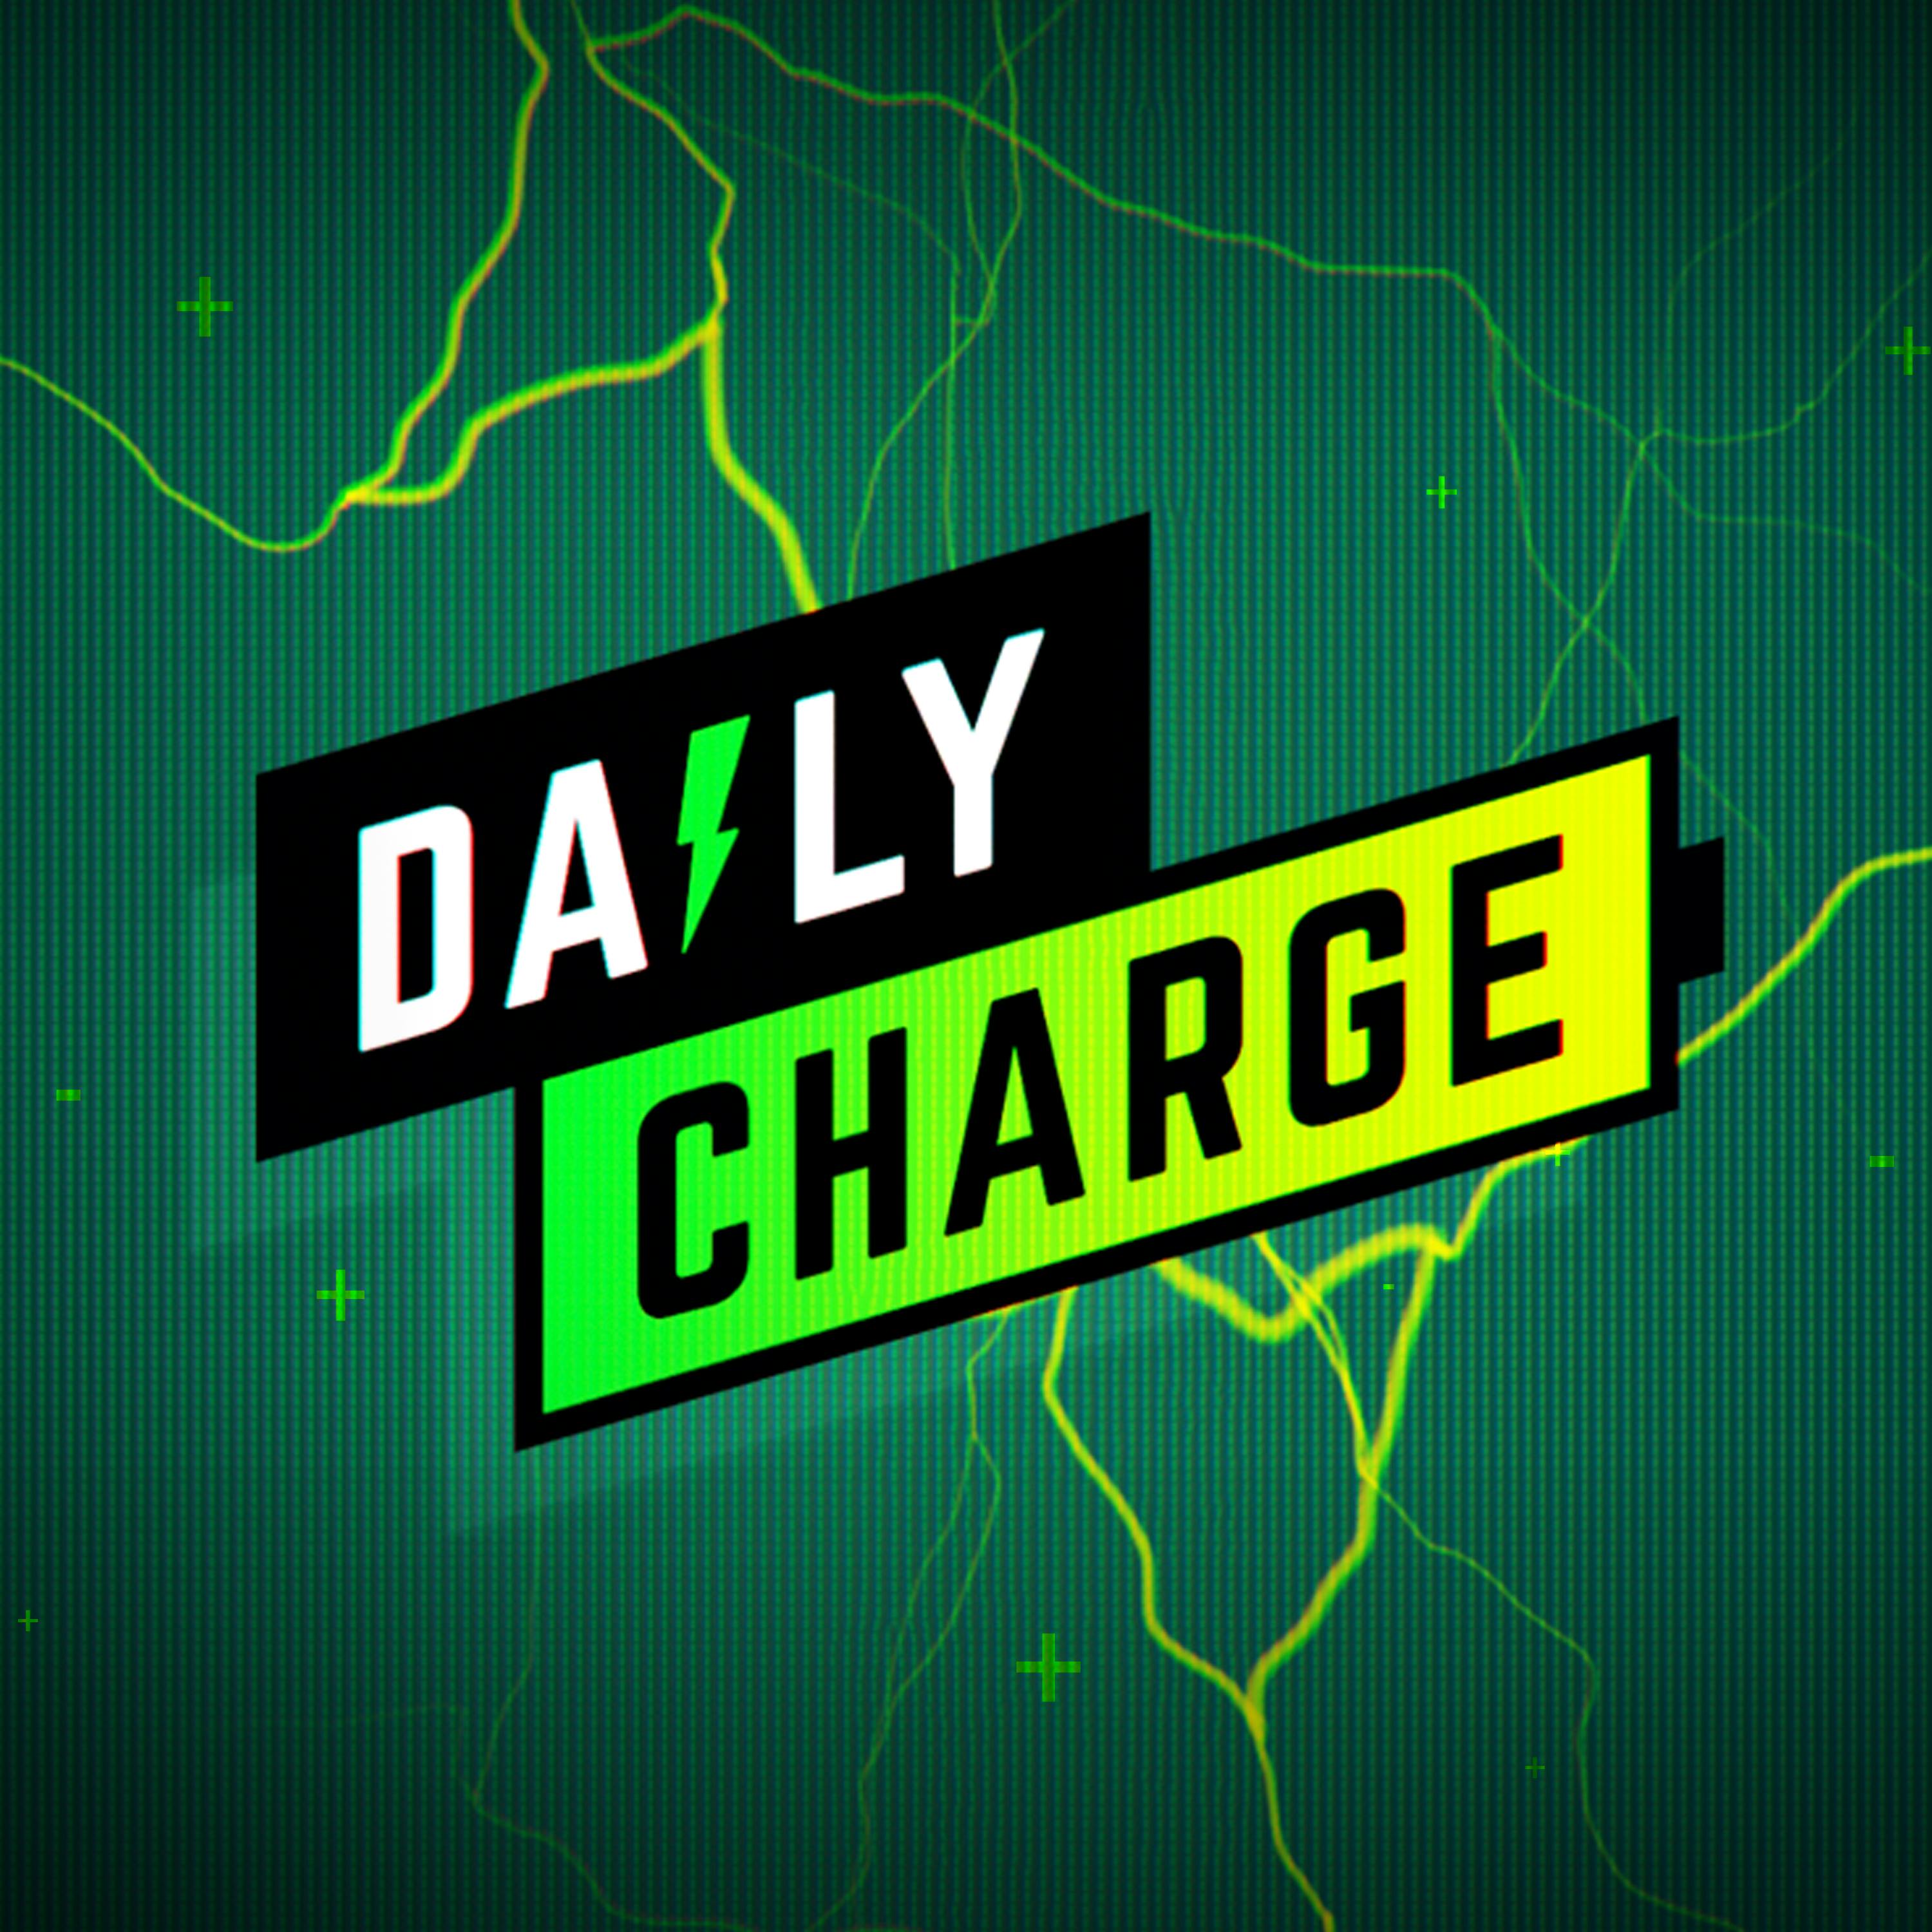 Video games are embracing NFTs. Here’s what you need to know (The Daily Charge, 1/21/2022)